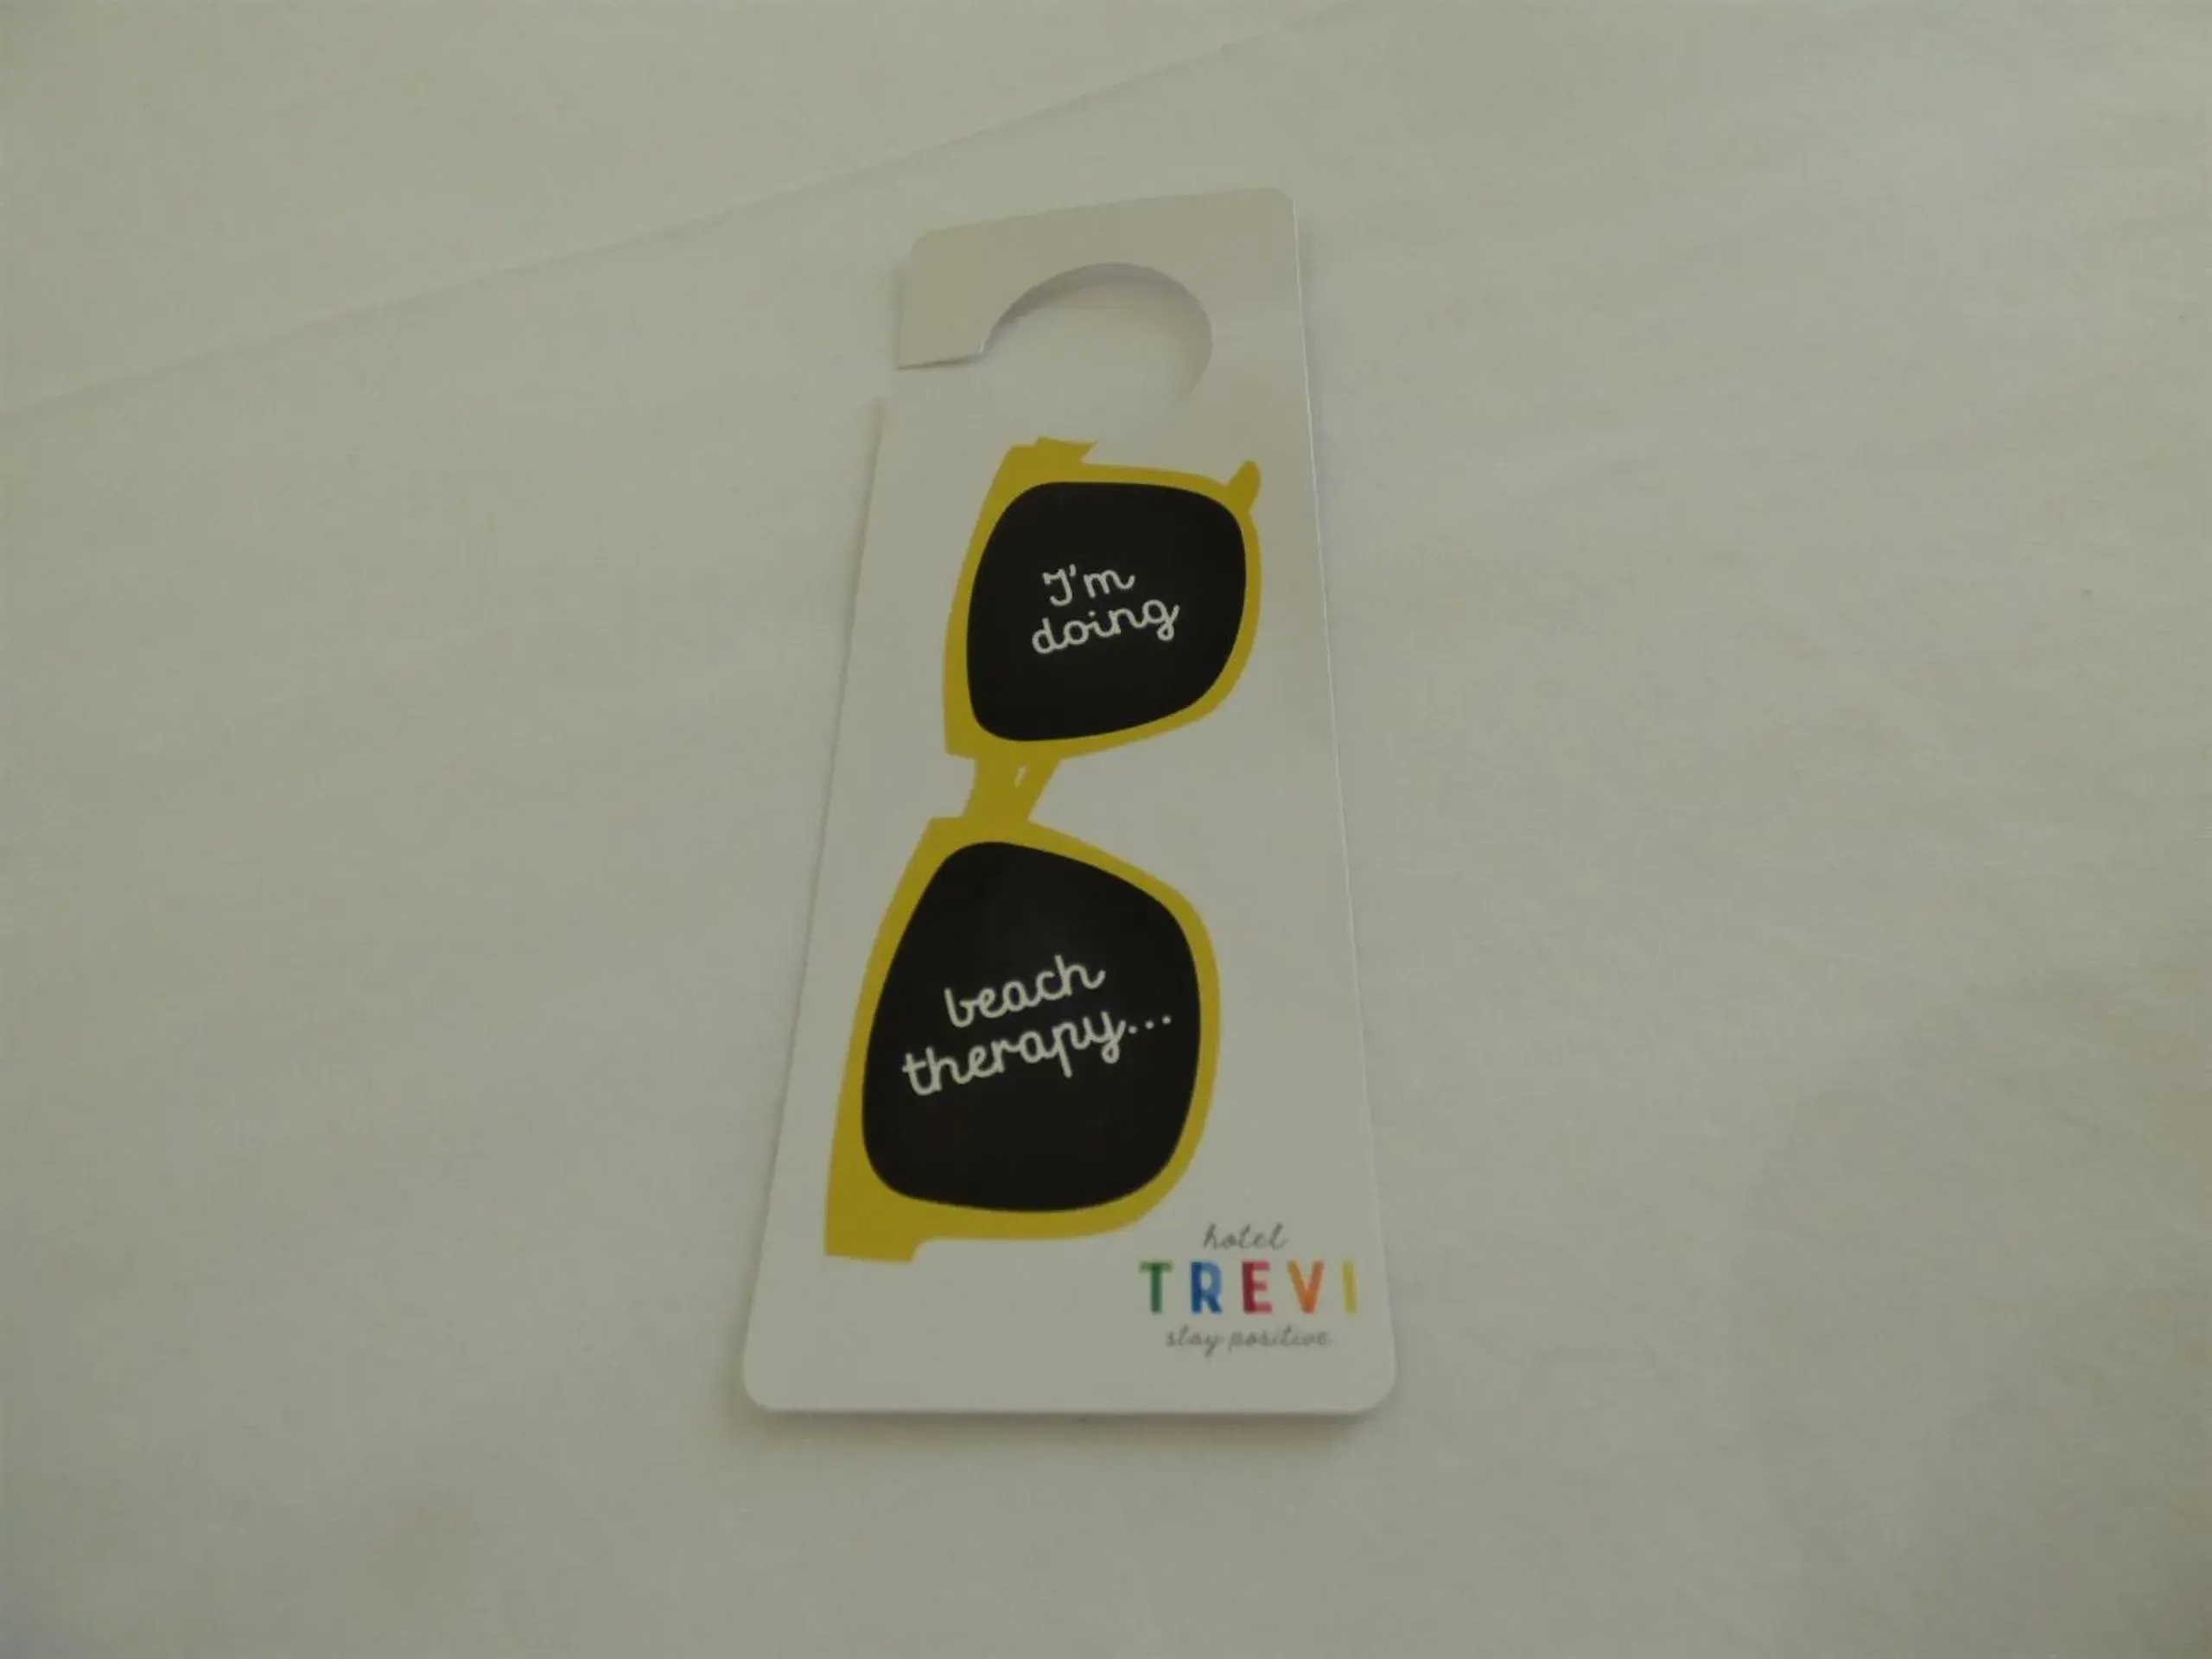 Other, Logo/Certificate/Sign/Award in Hotel Trevi